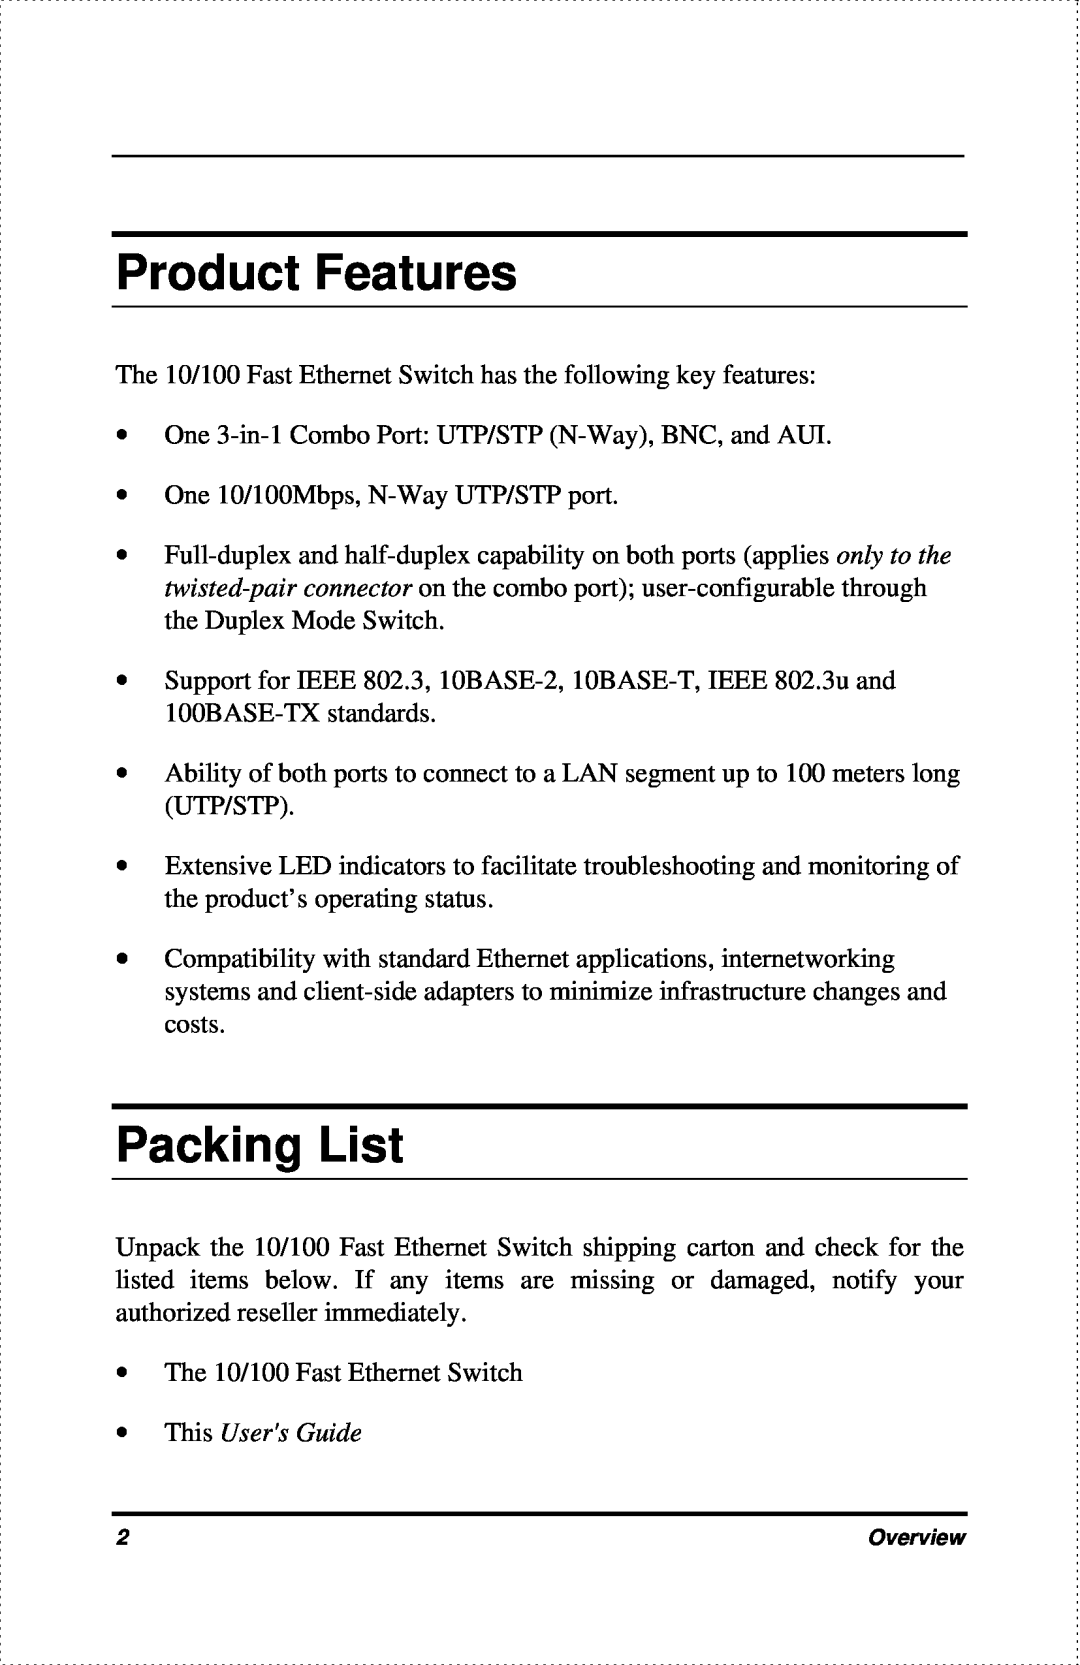 D-Link DES-802 manual Product Features, Packing List 